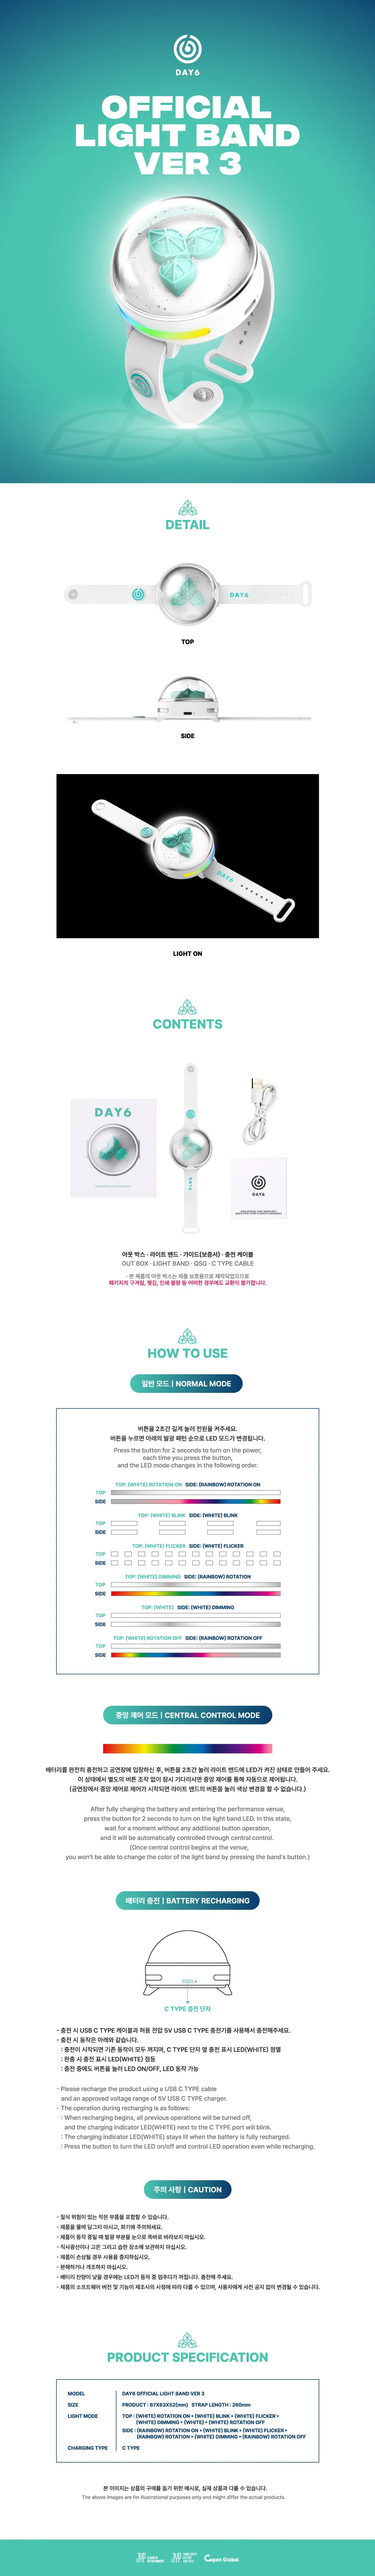 DAY6 Official Light Band Version 3